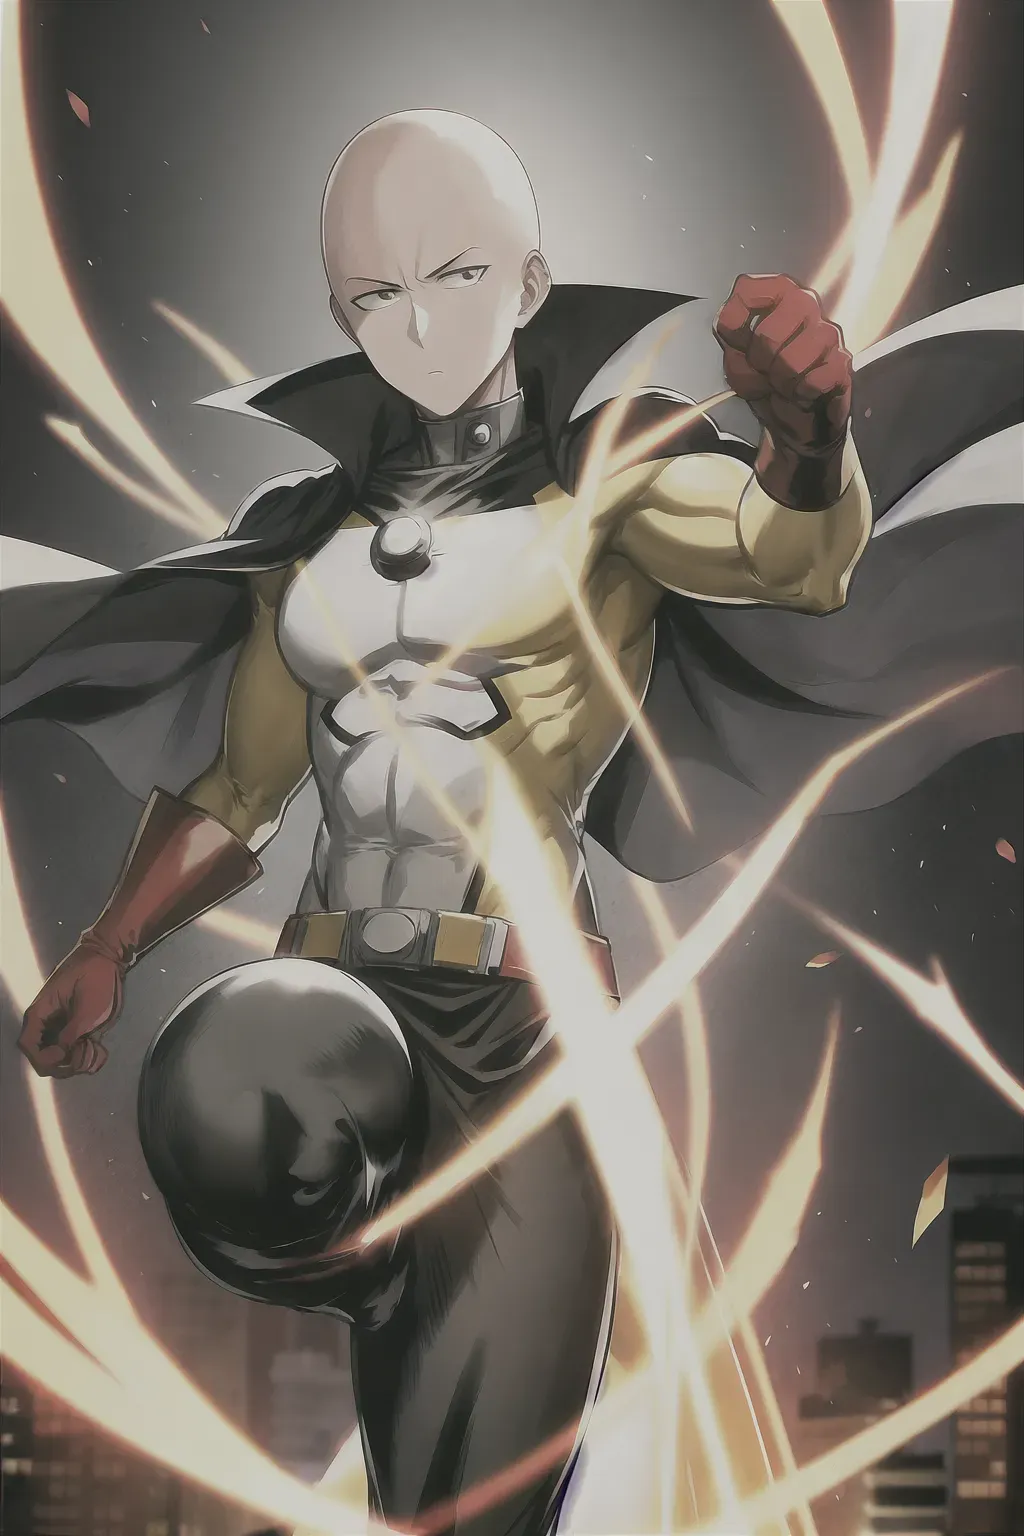 Dopamine Girl - One punch man, anime, bald head, 8k wallpaper, black eyes,  best quality, ultra hd, global lighting, hi-resolution, high quality,  yellow costume, white cape, red gloves, red boots, fighting stance